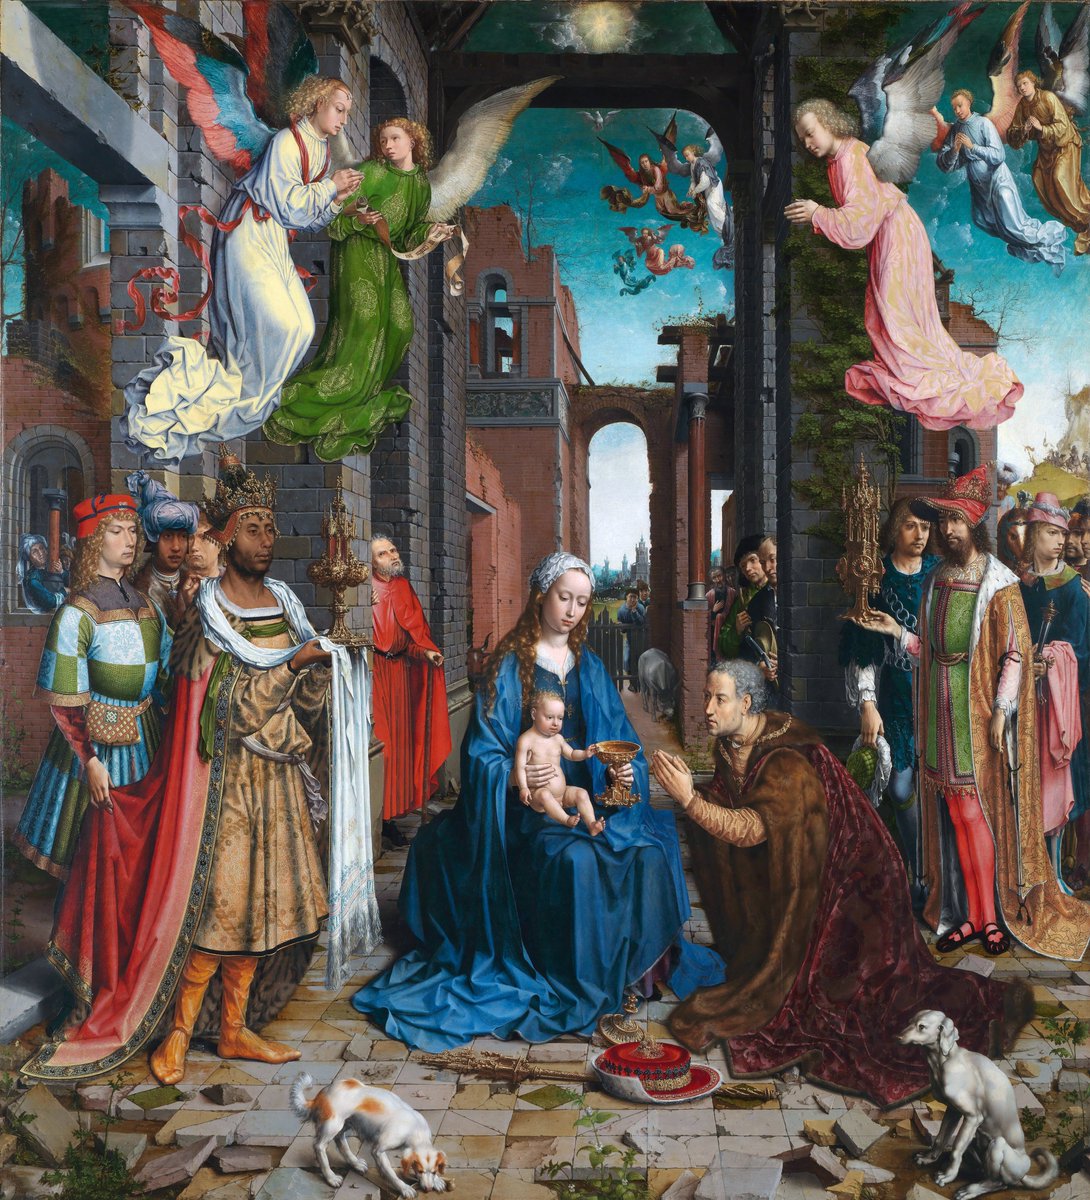 Adoration of the Kings. 1510-1515. Jan Gossaert.

This is a large (6ft x 5ft) oil painting on oak.

One biography describes him as leading 'an unruly life', although there seems to be no evidence to support this.

He died in 1532.

Northern #Renaissance #Art